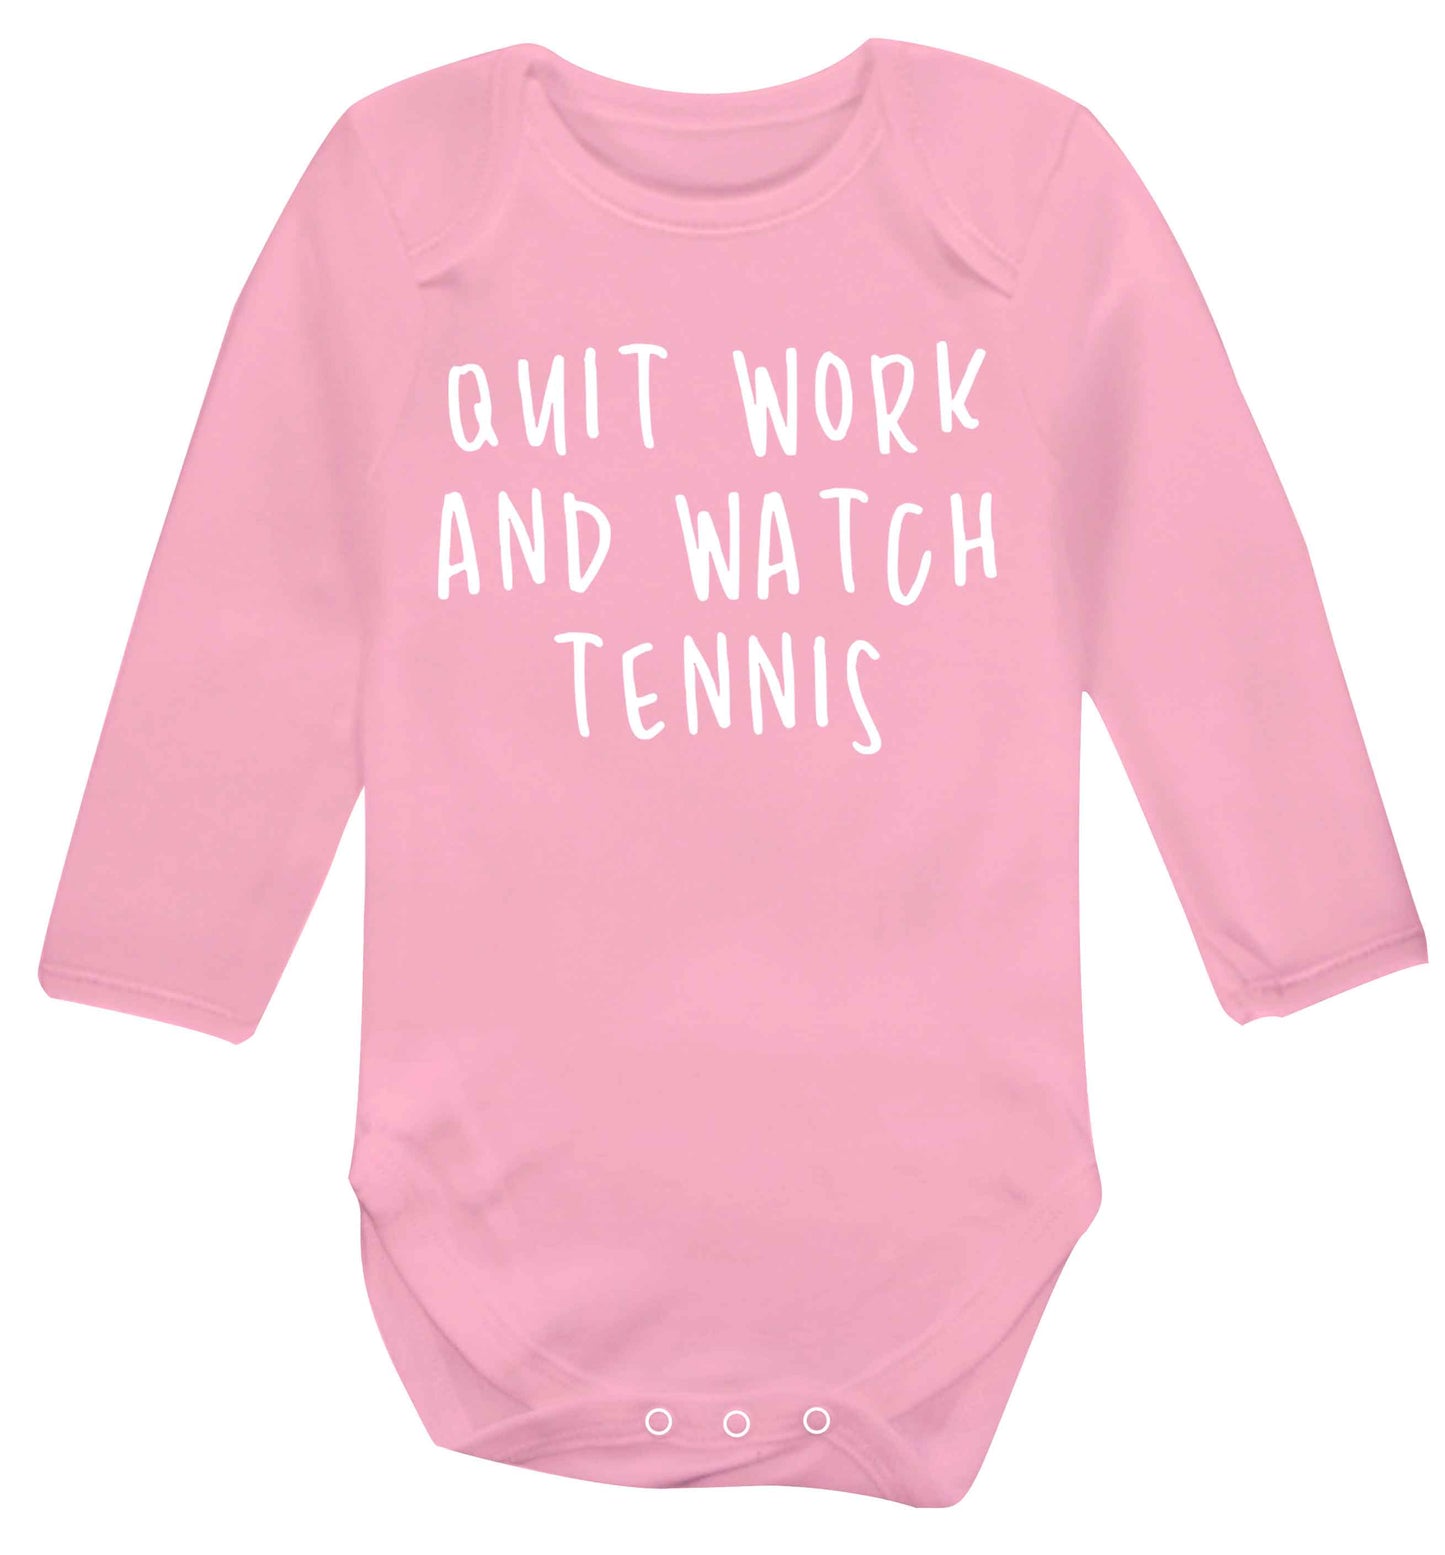 Quit work and watch tennis Baby Vest long sleeved pale pink 6-12 months